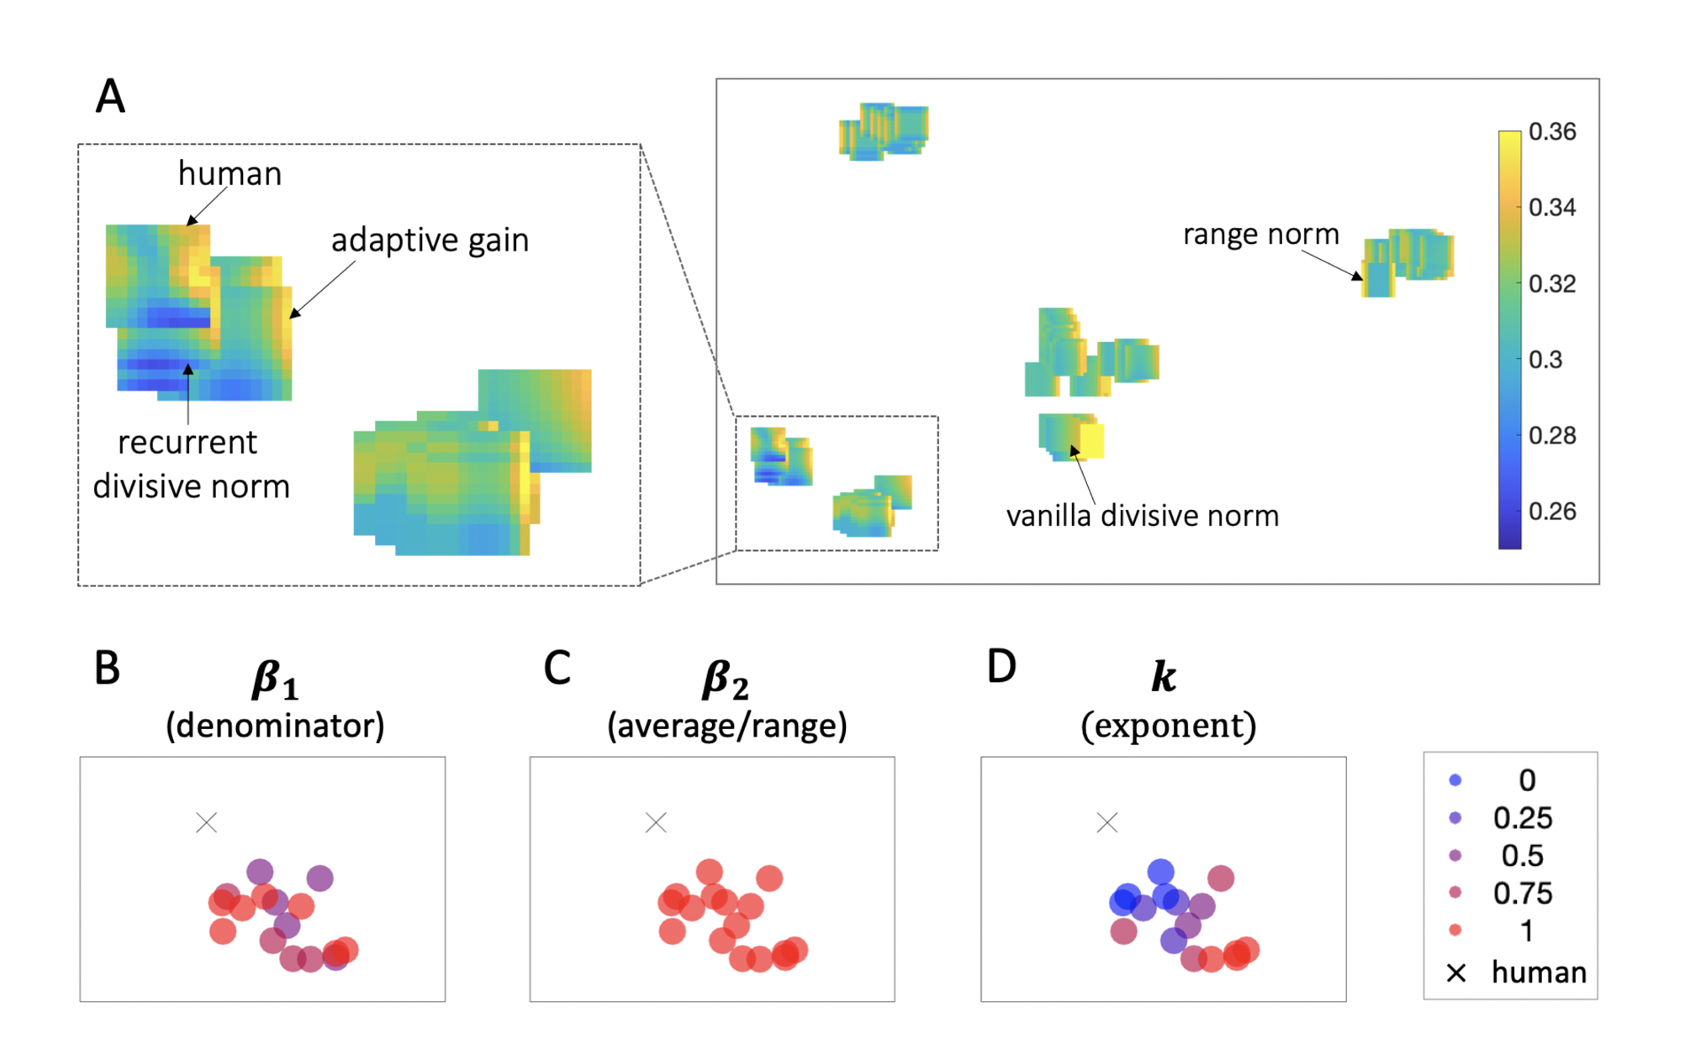 Charting decoy models. $\textbf{A:}$ Embedding space for normalization models of decoy effects. A $t$-distributed stochastic neighbour visualization of the maps of decoy influence produced by different variants of the grandmother model. Each map represents a variant of the grandmother model positioned in 2D space such that models with similar decoy influence patterns are nearby, while models with more different decoy patterns are further apart. Heat maps illustrate decoy influence. The rectangle on the left shows a zoomed in version of the denoted subset of embedding space. $\textbf{B-D:}$ These plots depict the zoomed in subset of embedding space presented above. Each model-produced decoy map is denoted as a dot and color coded to indicate parameter value: $\beta_1$ (panel B), $\beta_2$ (panel C), or $k$ (panel D). Human data is represented with a cross.